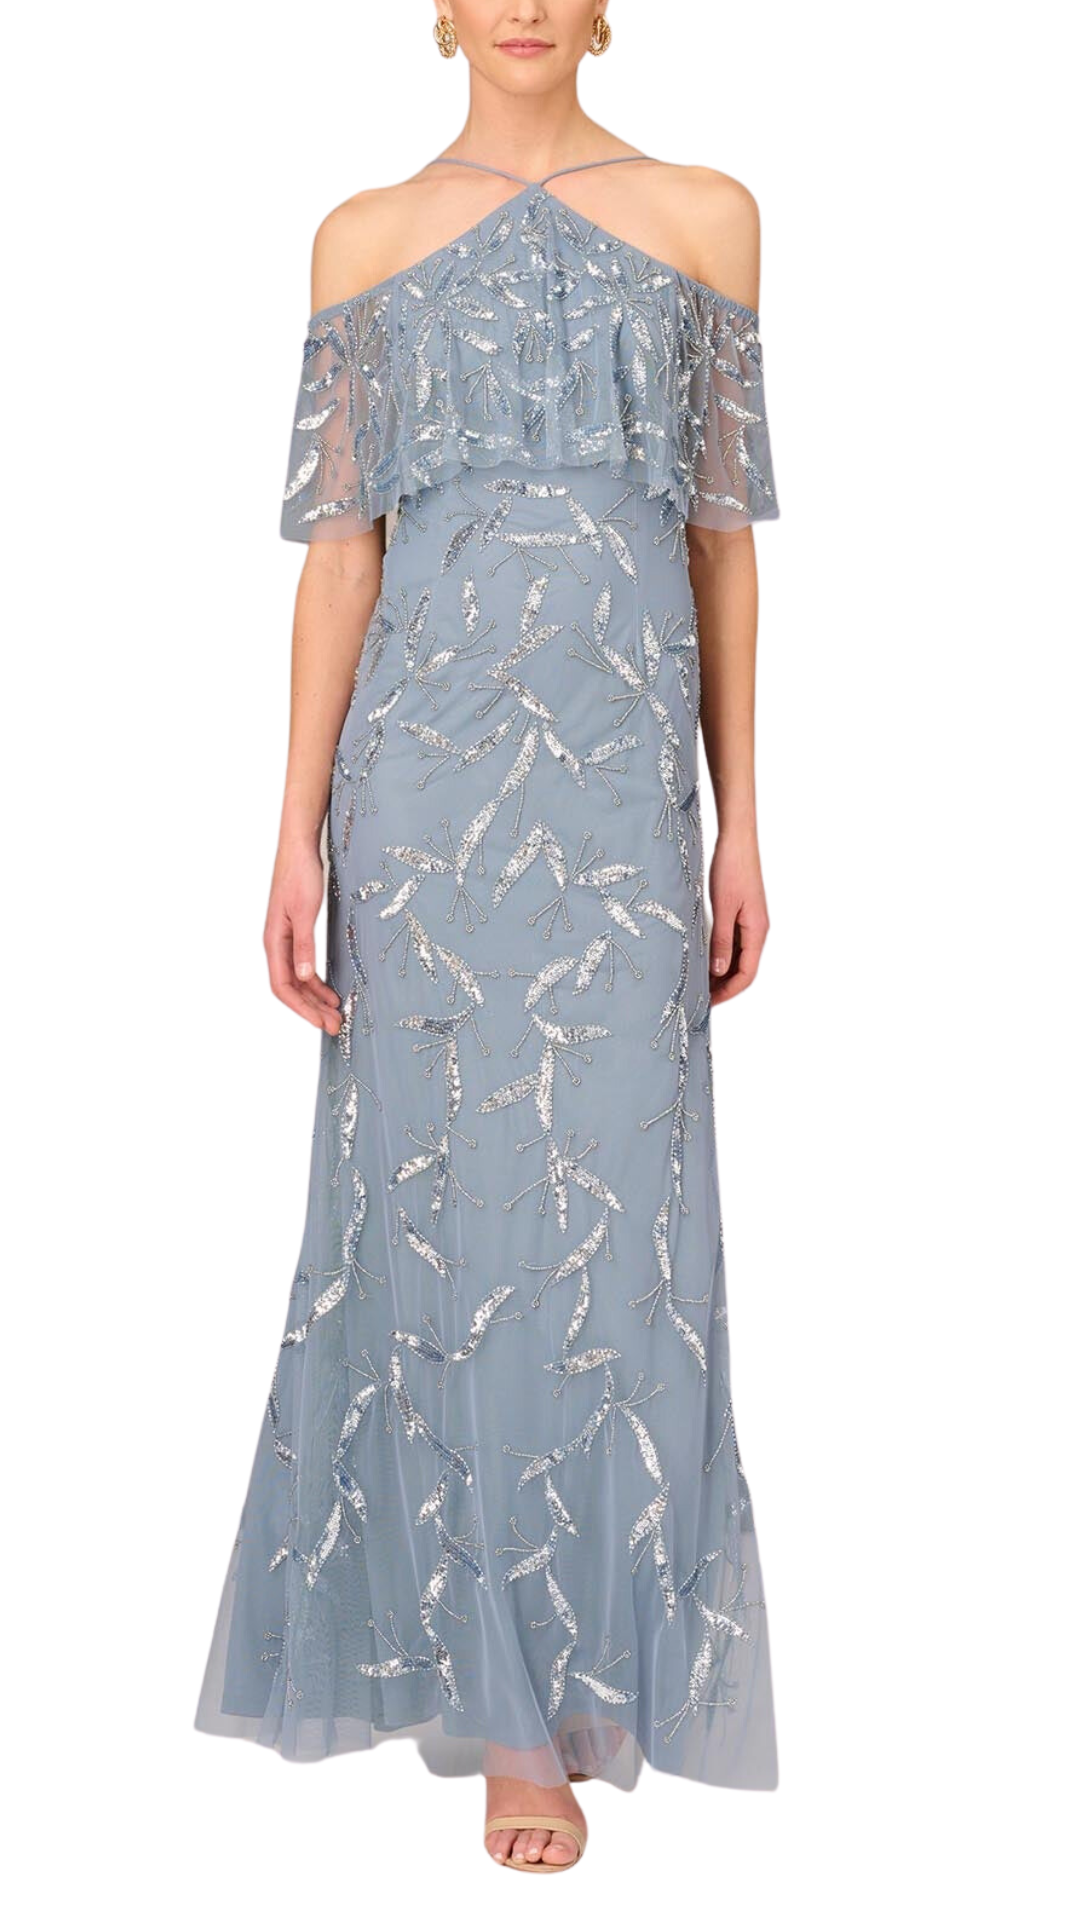 Adrianna Papell Handbeaded Off-Shoulder Gown in Vintage Blue